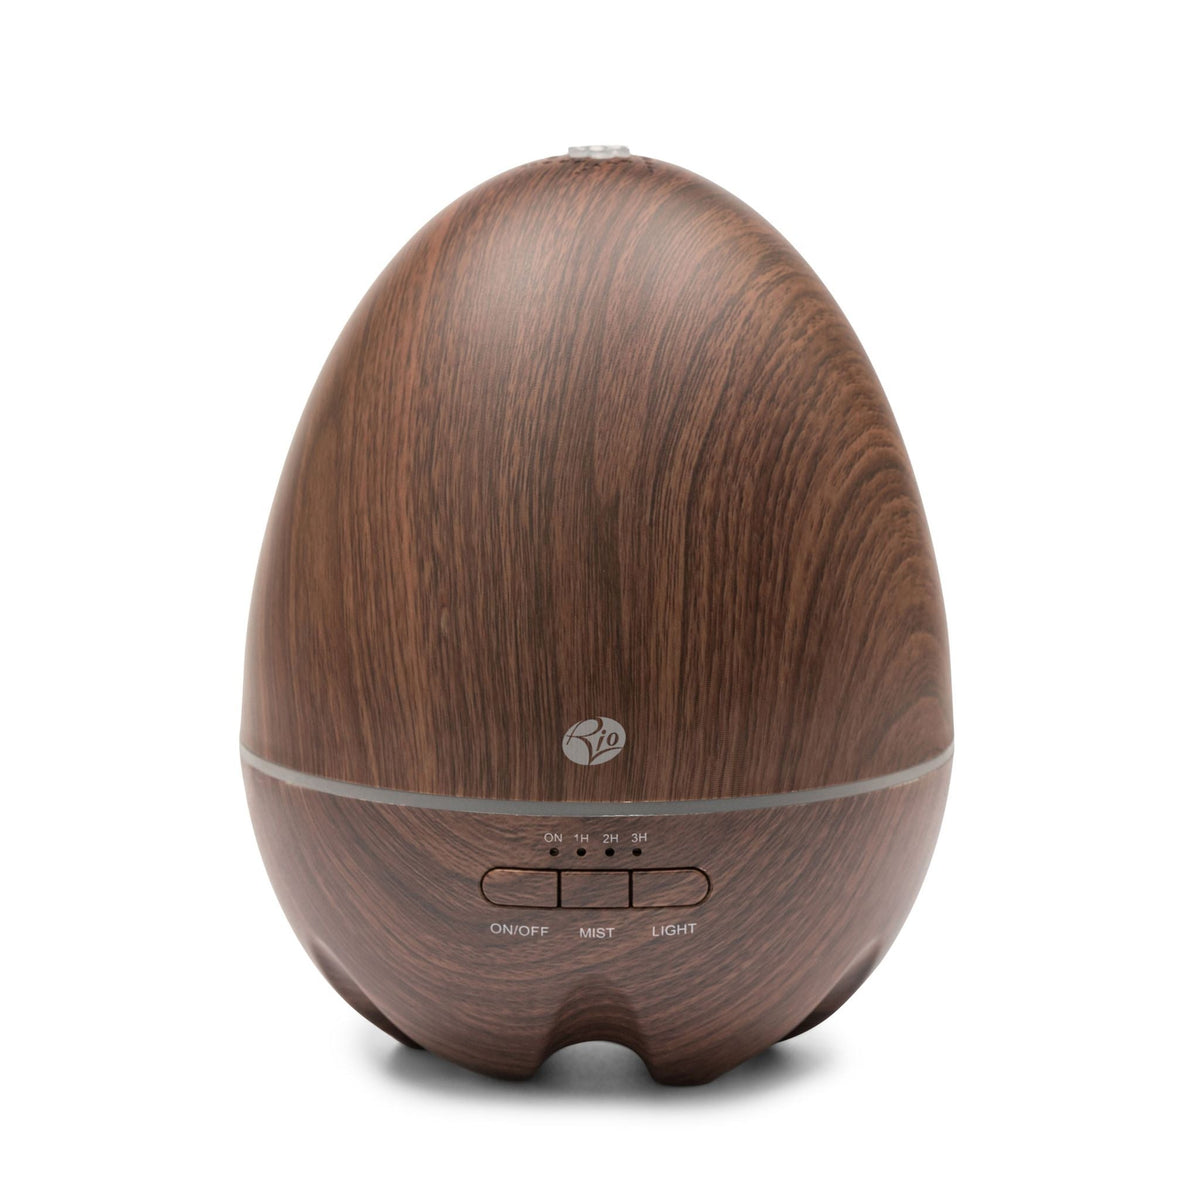 ARIA Aroma Diffuser Humidifier and Nightlight - Rio the Beauty Specialists